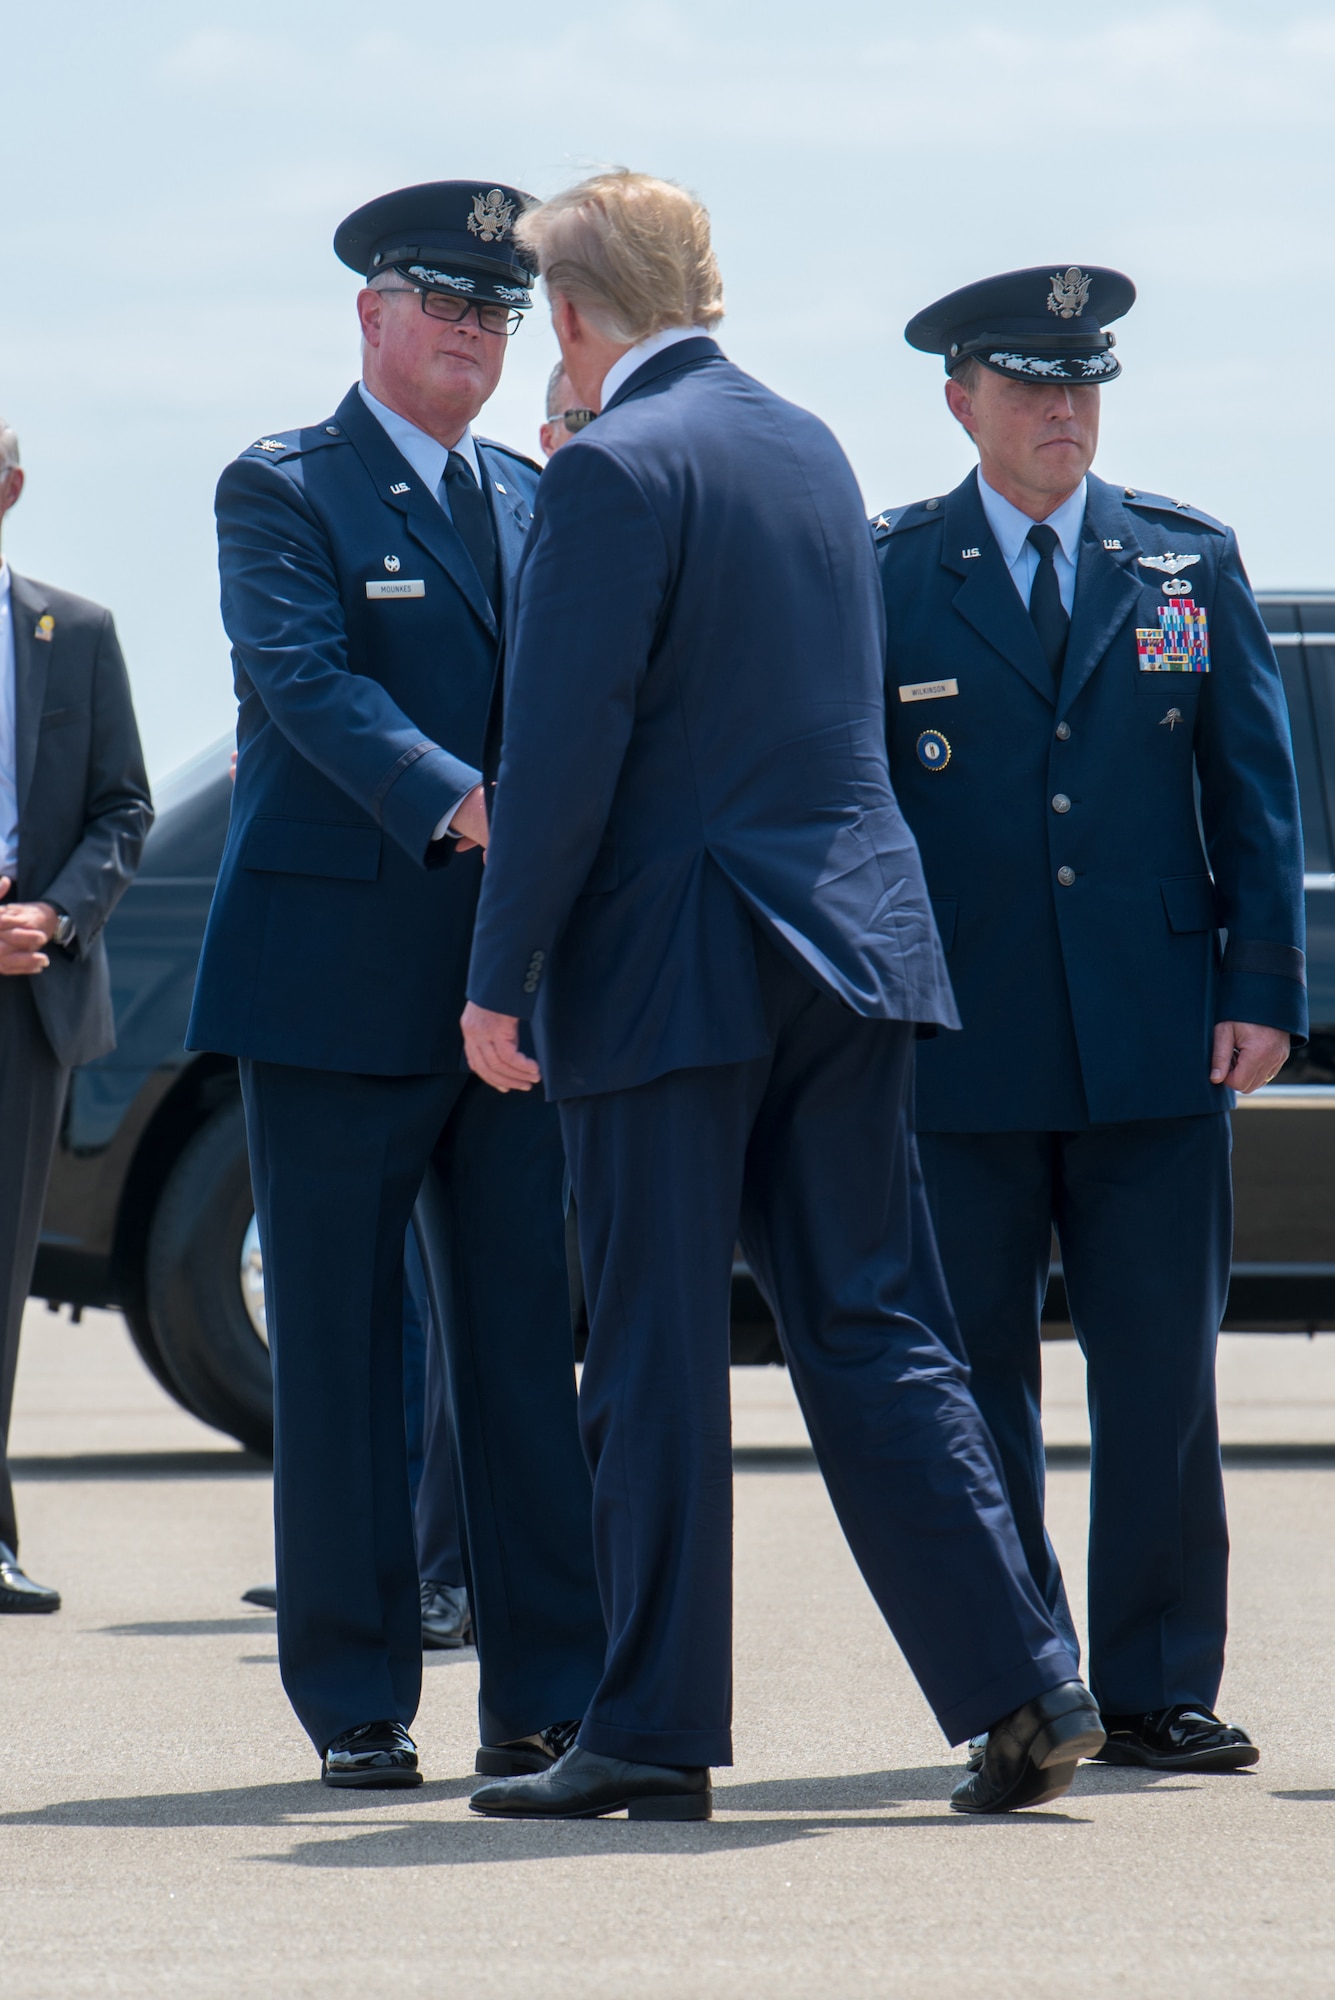 President Donald Trump greets Col. David J. Mounkes, commander of the 123rd Airlift Wing, at the Kentucky Air National Guard Base in Louisville, Ky., Aug. 21, 2019. Trump was in town to speak at an AMVETS convention and attend a fundraiser for Kentucky Gov. Matt Bevin’s re-election campaign. (U.S. Air National Guard photo by Staff Sgt. Joshua Horton)